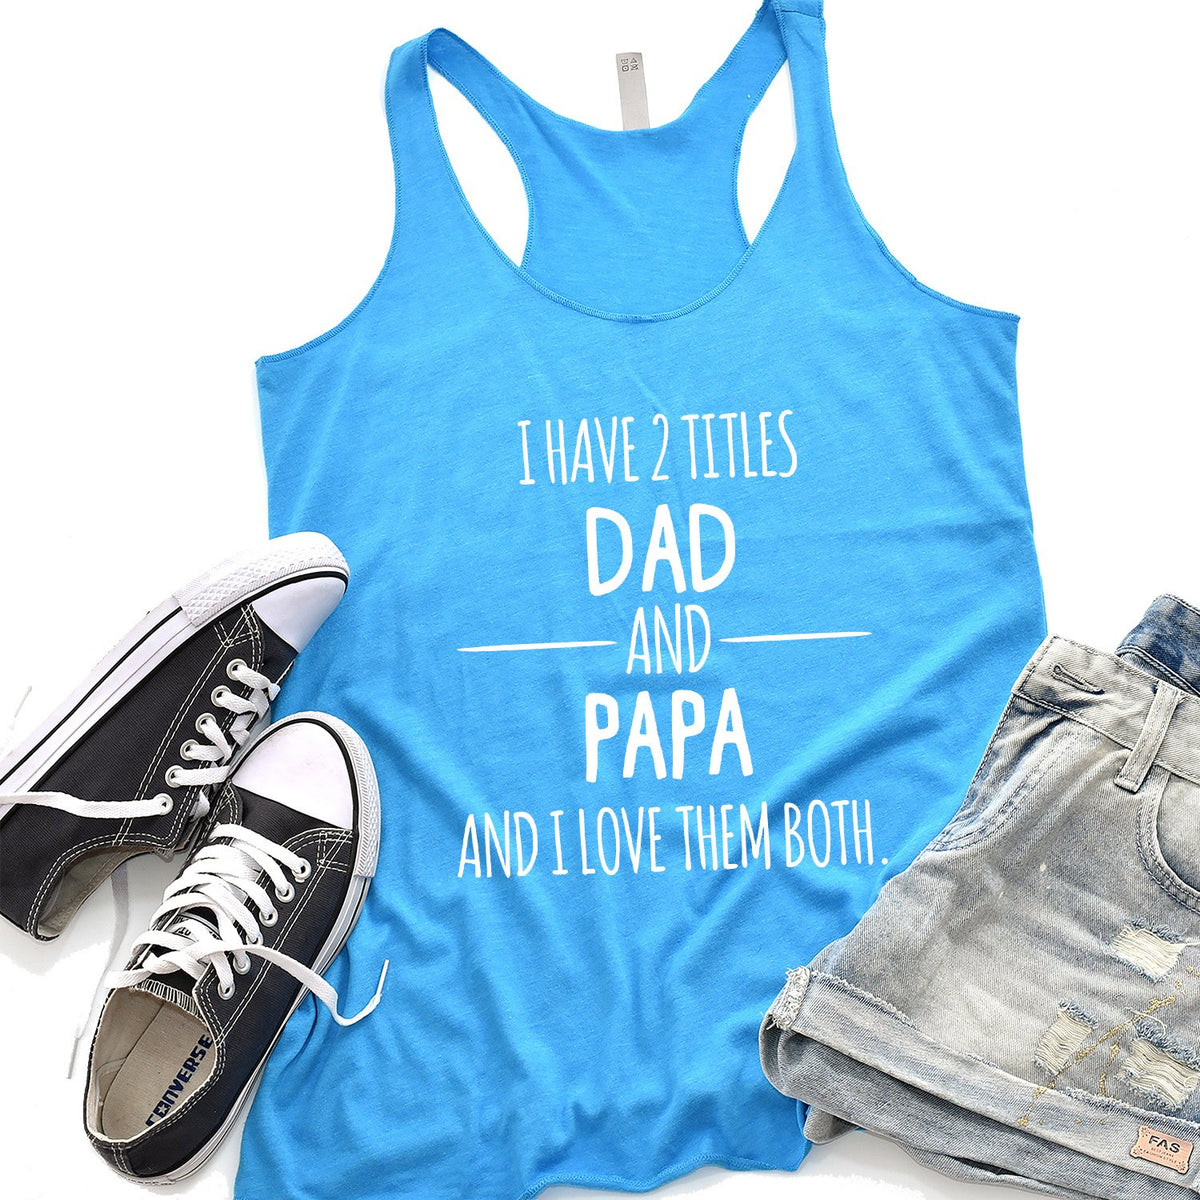 I Have 2 Titles Dad and Papa and I Love Them Both - Tank Top Racerback